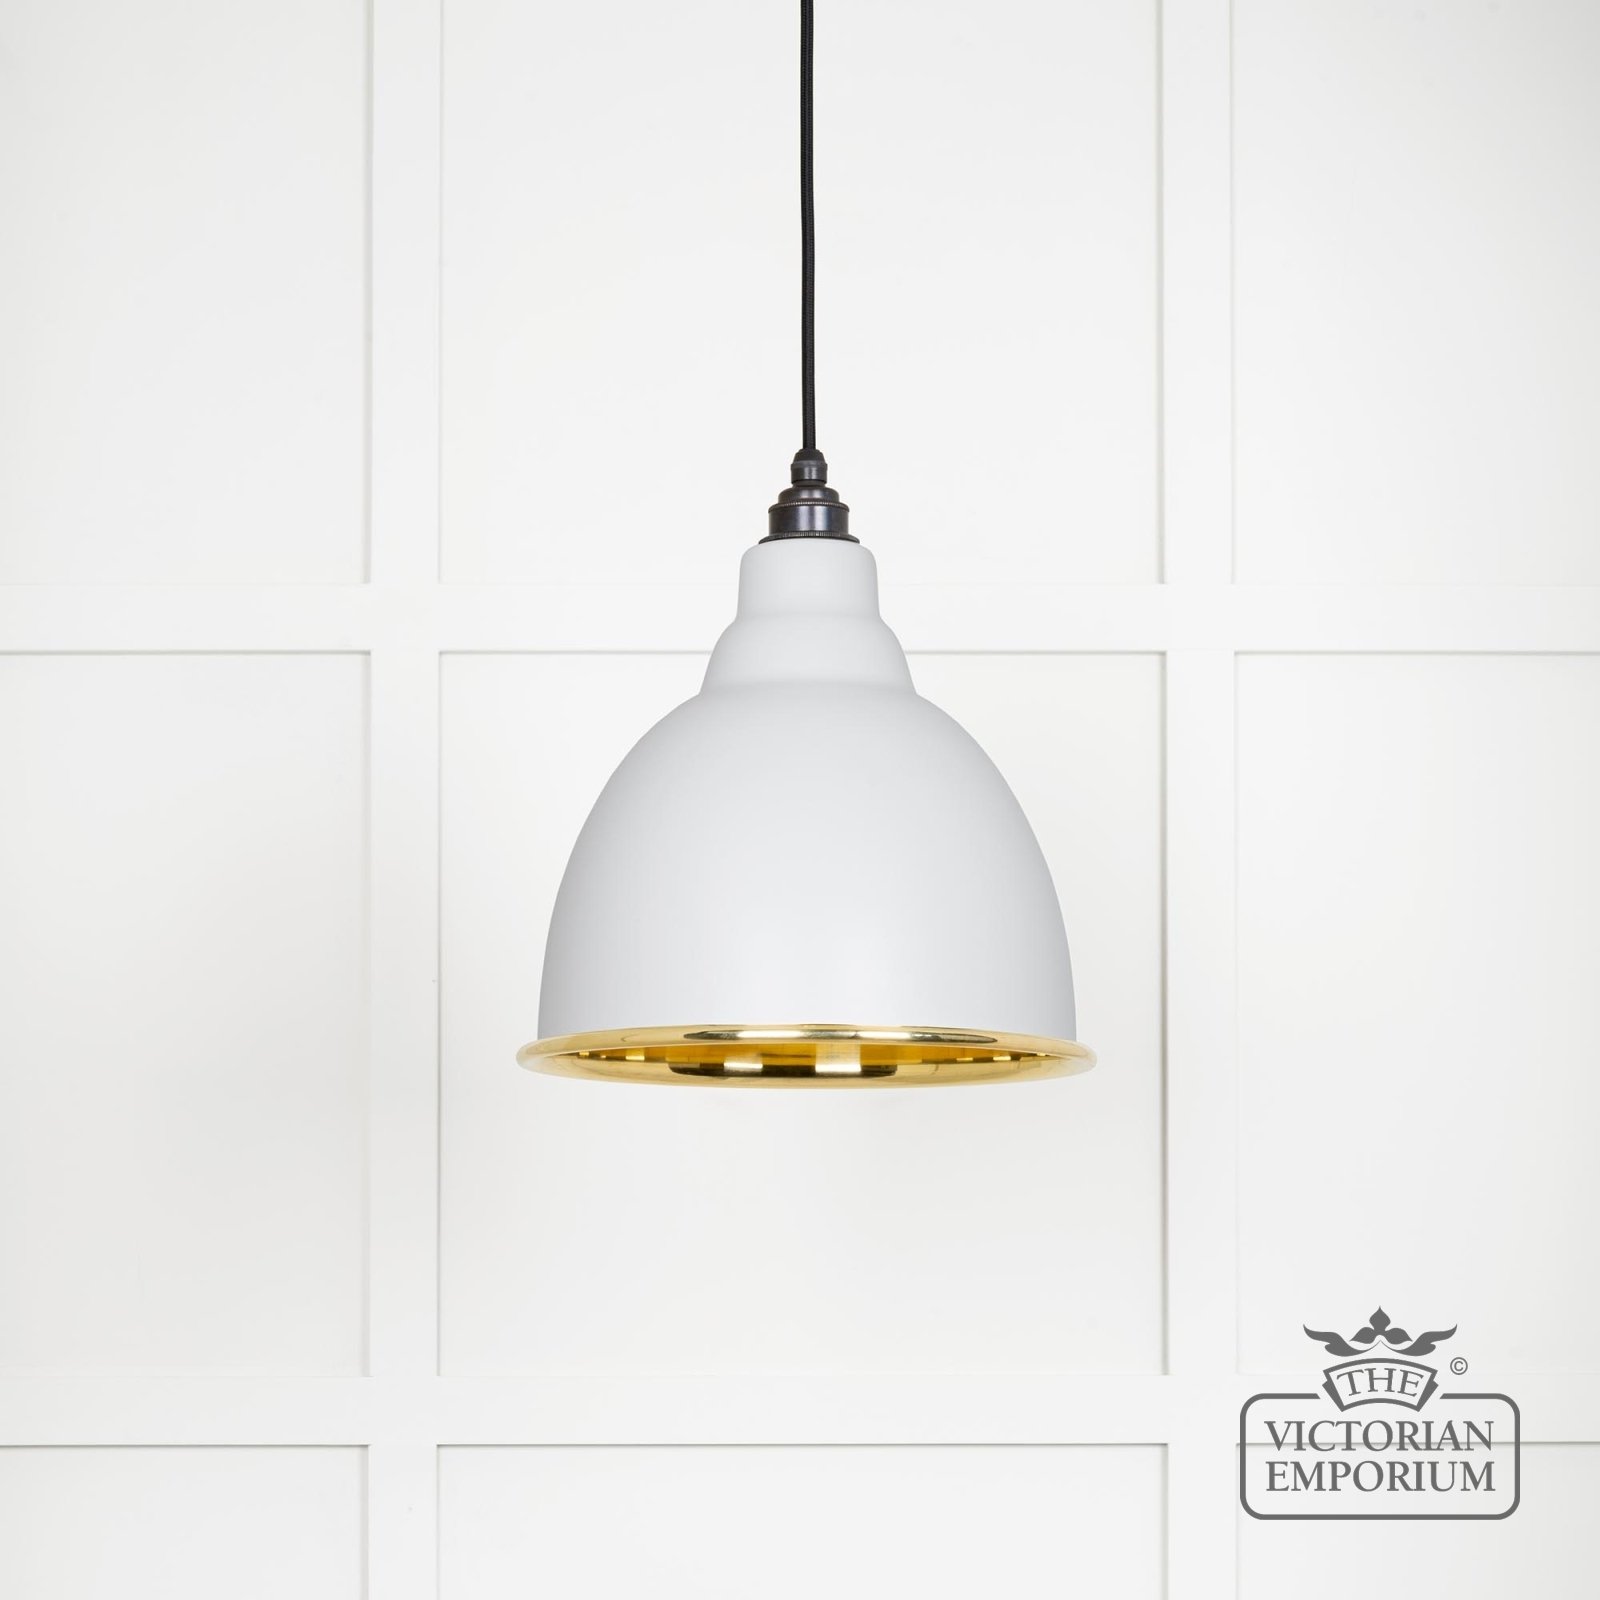 Brindle pendant light in Smooth brass and Flock finish